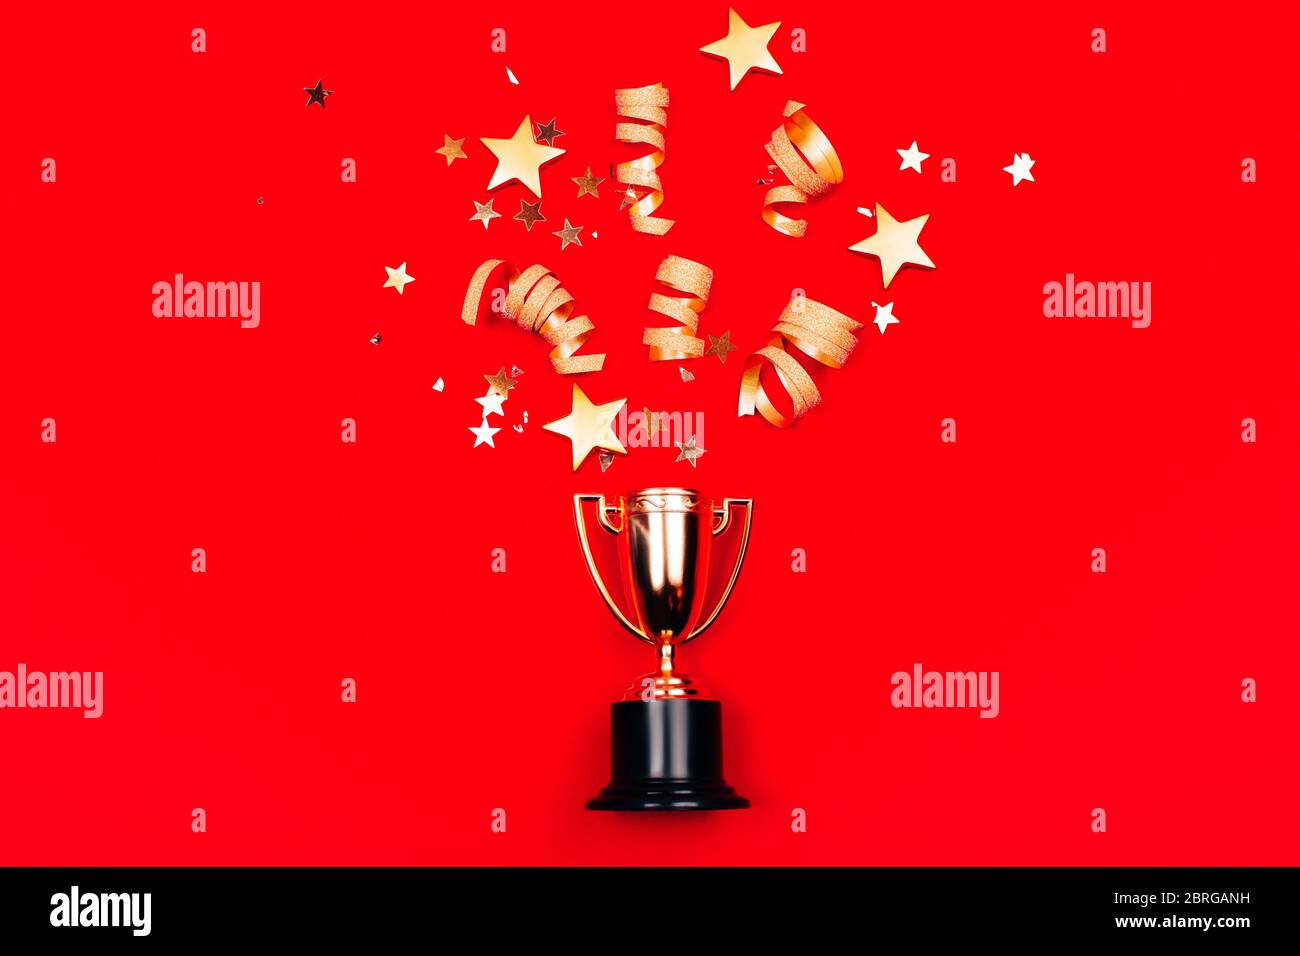 Confetti Award High Resolution Stock Photography and Images - Alamy